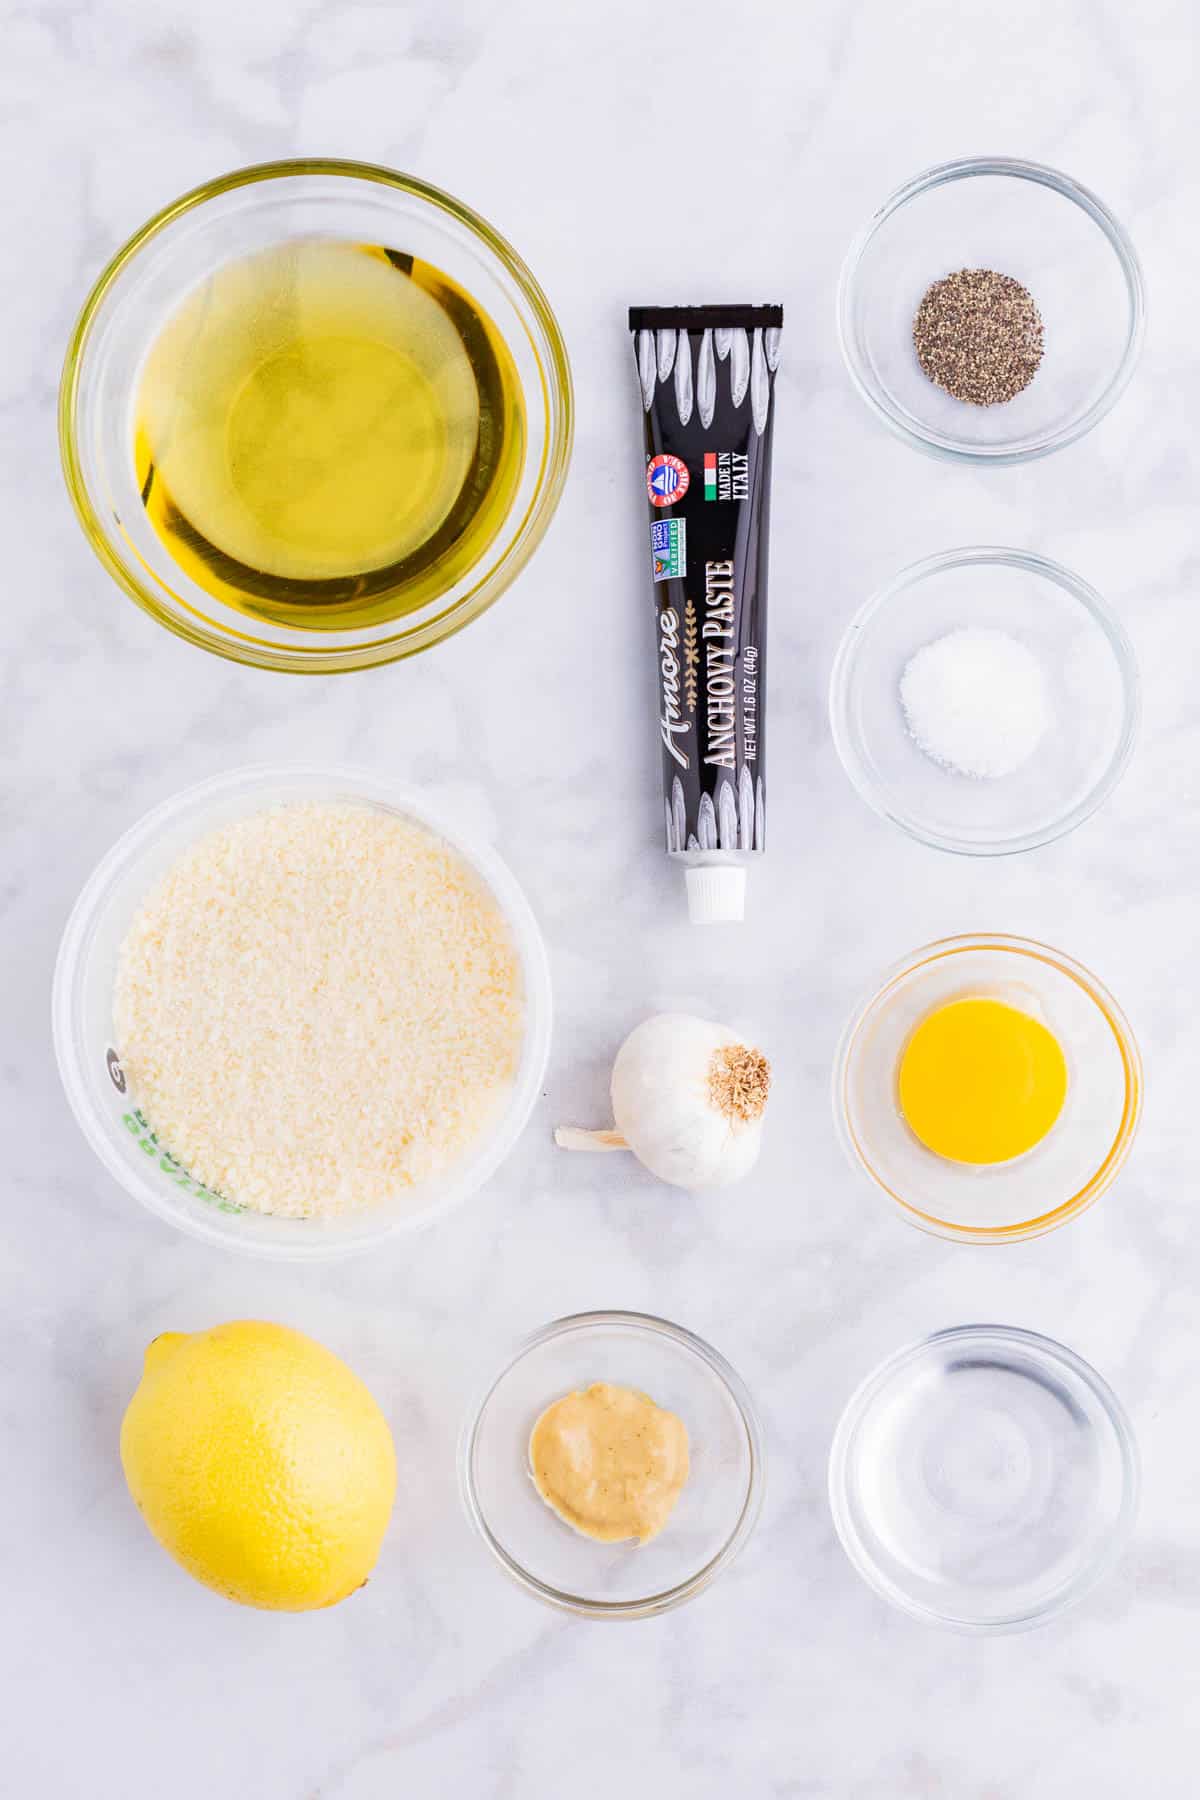 Anchovy paste, Parmesan cheese, eggs, oil, and garlic are the main ingredients for this dressing.